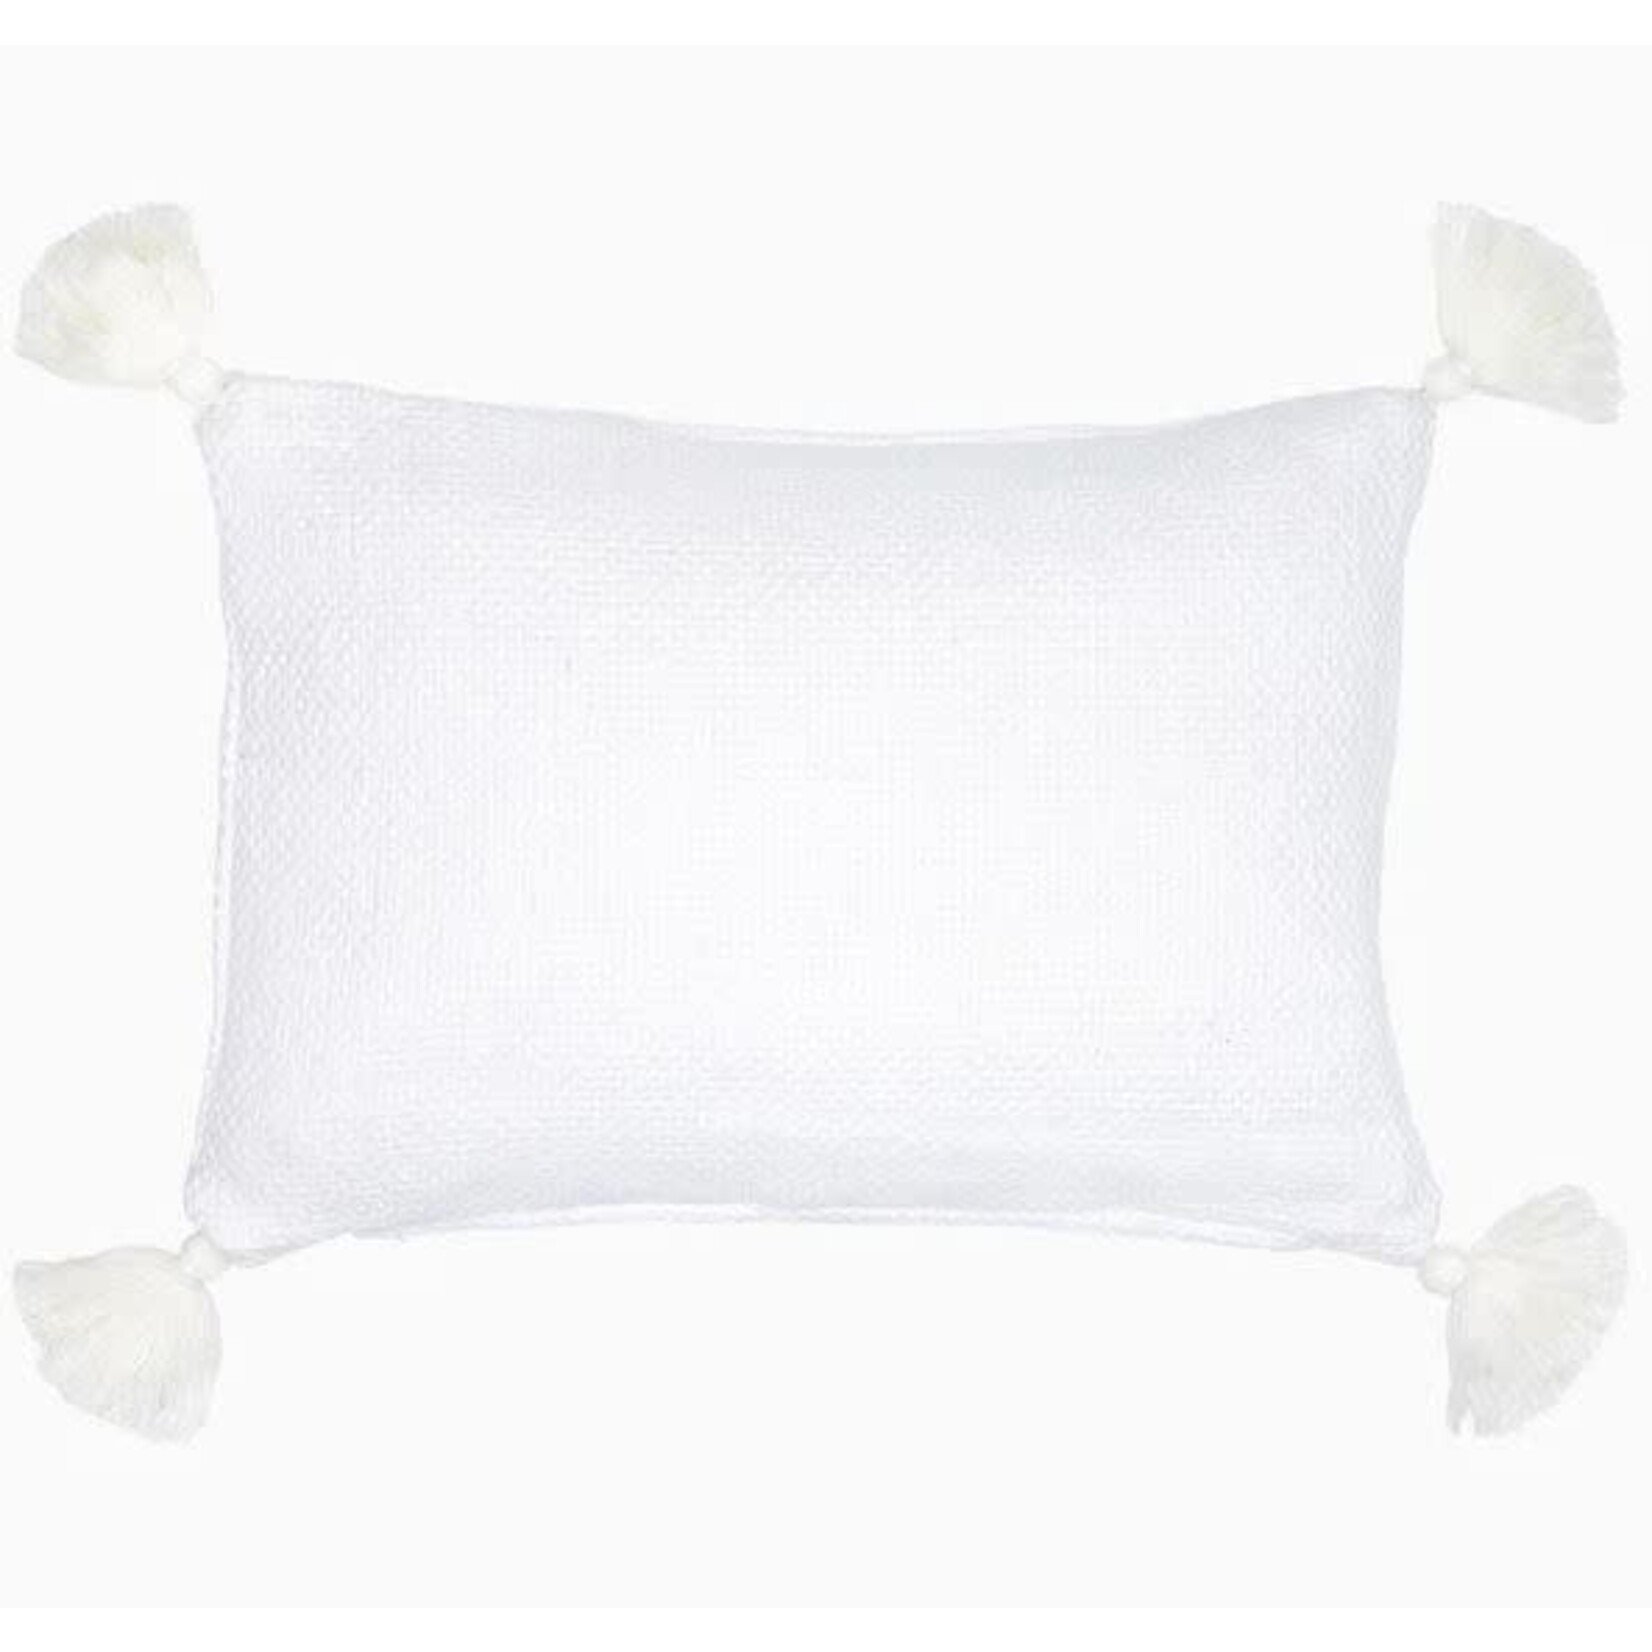 John Robshaw Textiles Woven Ivory Kidney Pillow  with Insert 12x18